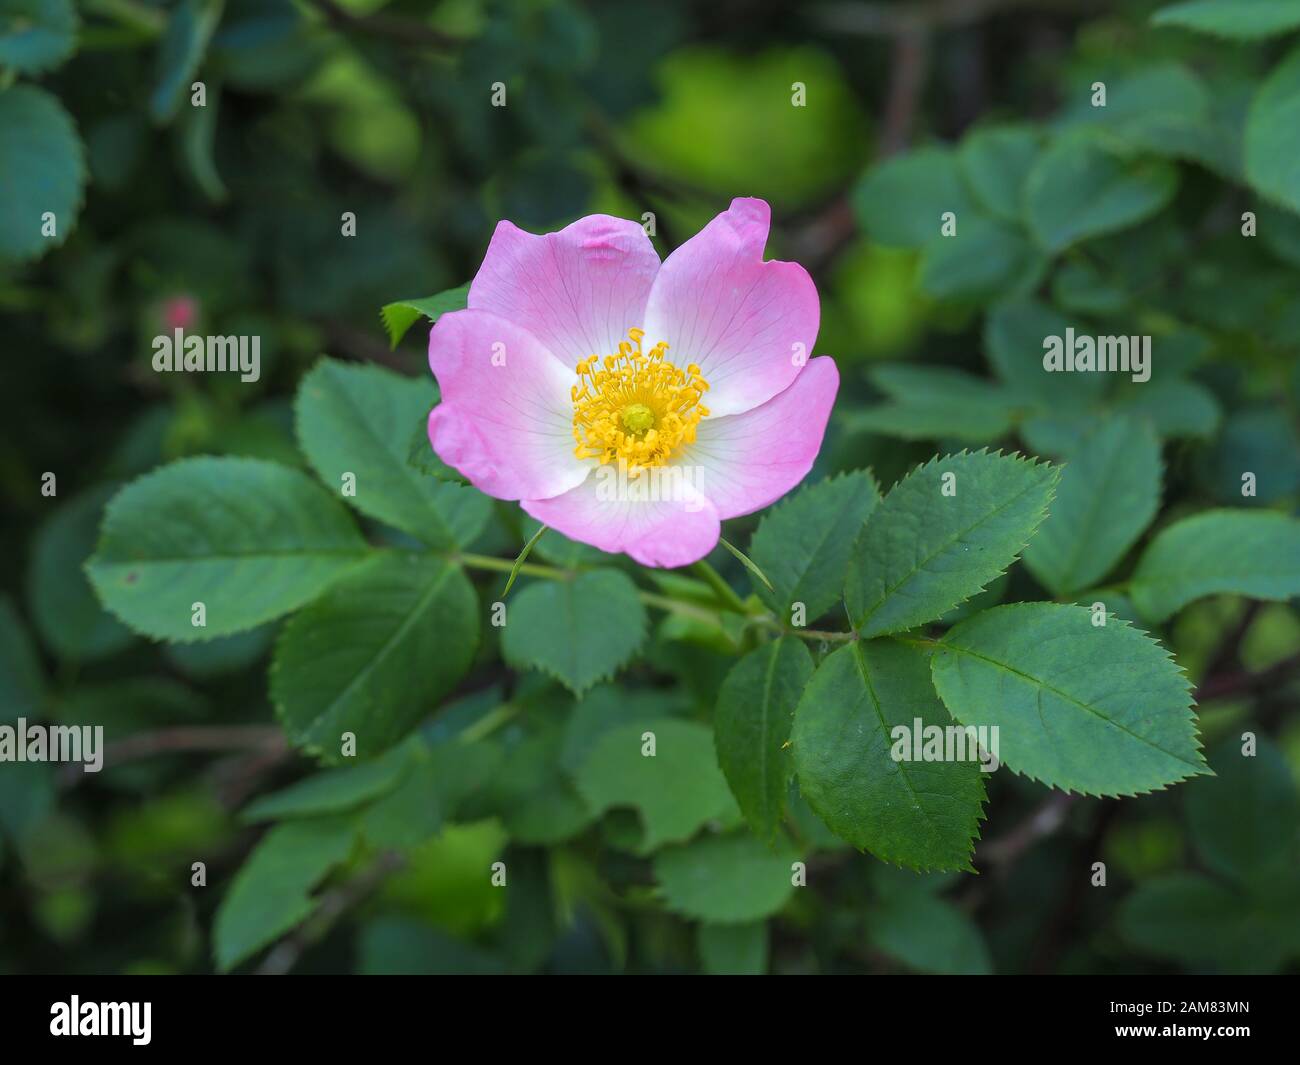 Pretty pink dog rose flower, Rosa canina, and green leaves in a hedgerow Stock Photo